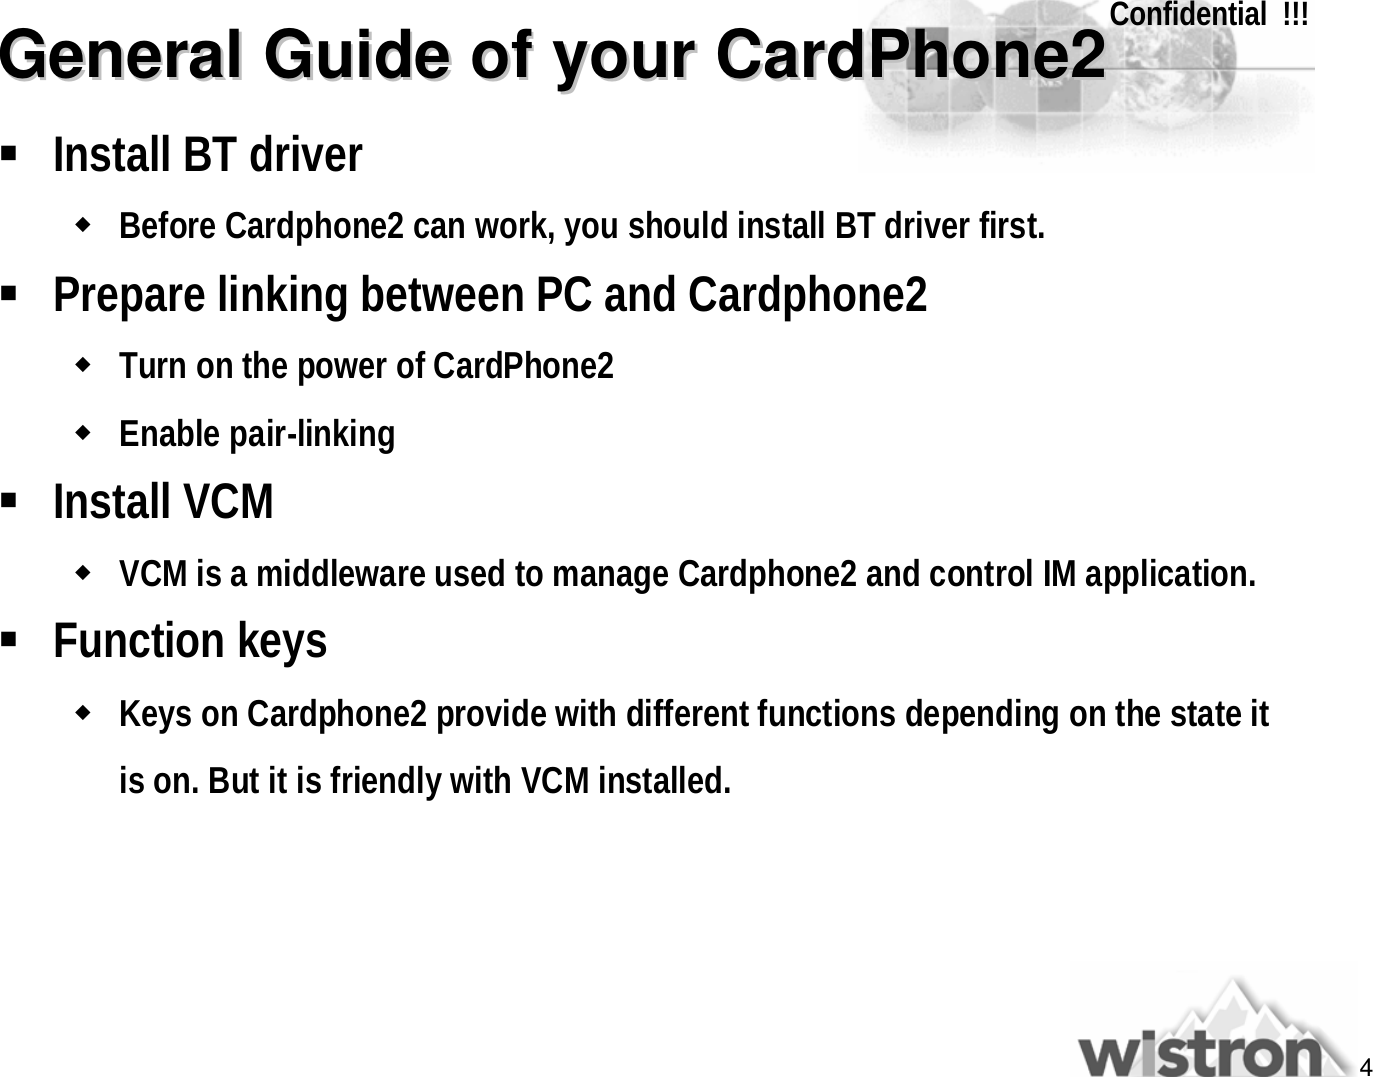 4Confidential  !!!General Guide of your CardPhone2General Guide of your CardPhone2§Install BT driverwBefore Cardphone2 can work, you should install BT driver first.§Prepare linking between PC and Cardphone2wTurn on the power of CardPhone2wEnable pair-linking§Install VCMwVCM is a middleware used to manage Cardphone2 and control IM application.§Function keyswKeys on Cardphone2 provide with different functions depending on the state it is on. But it is friendly with VCM installed.